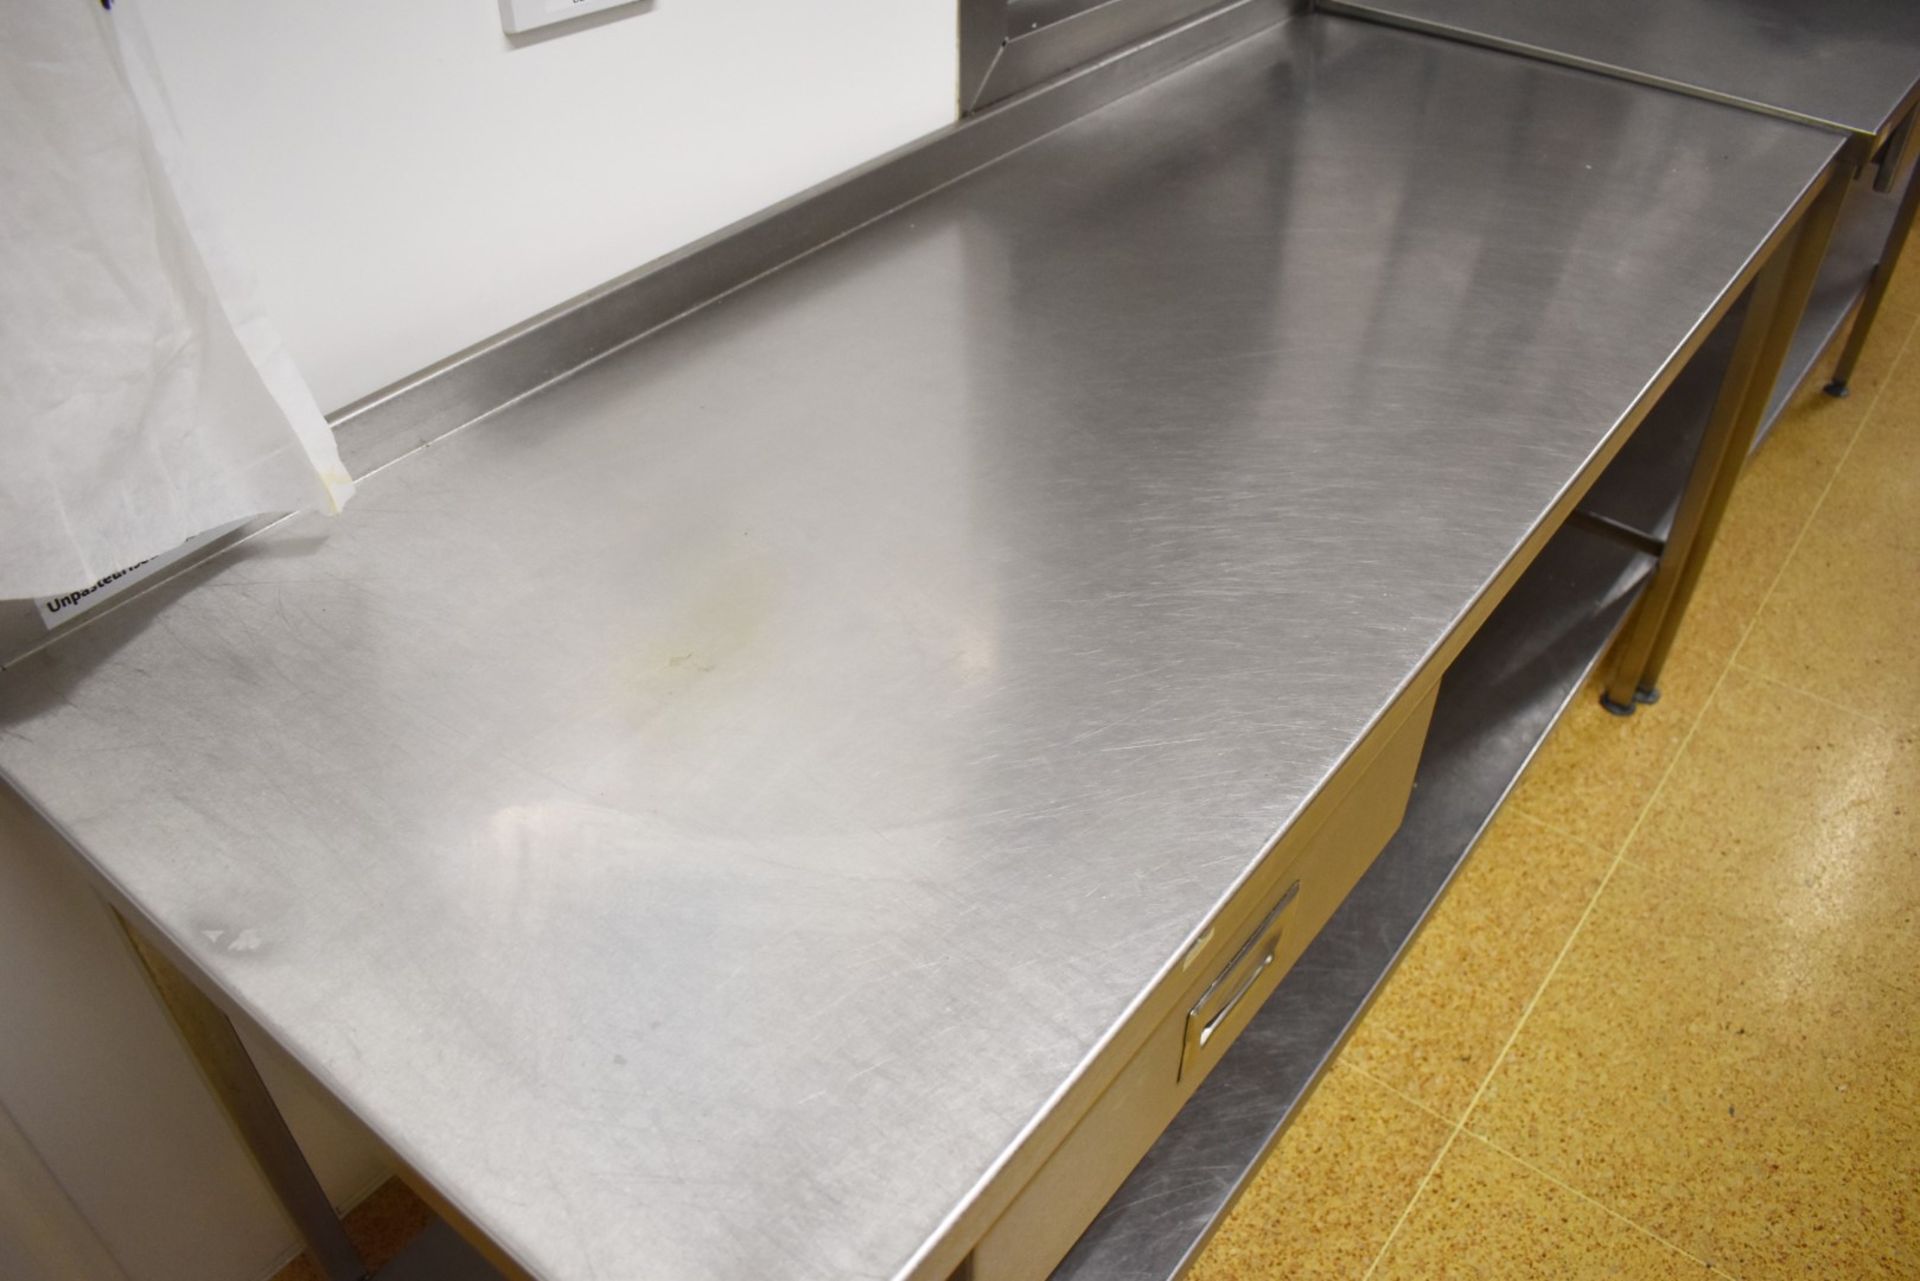 1 x Large Stainless Steel Prep Table With Upstand, Undershelf and Single Integrated Drawer H85 x - Image 4 of 5